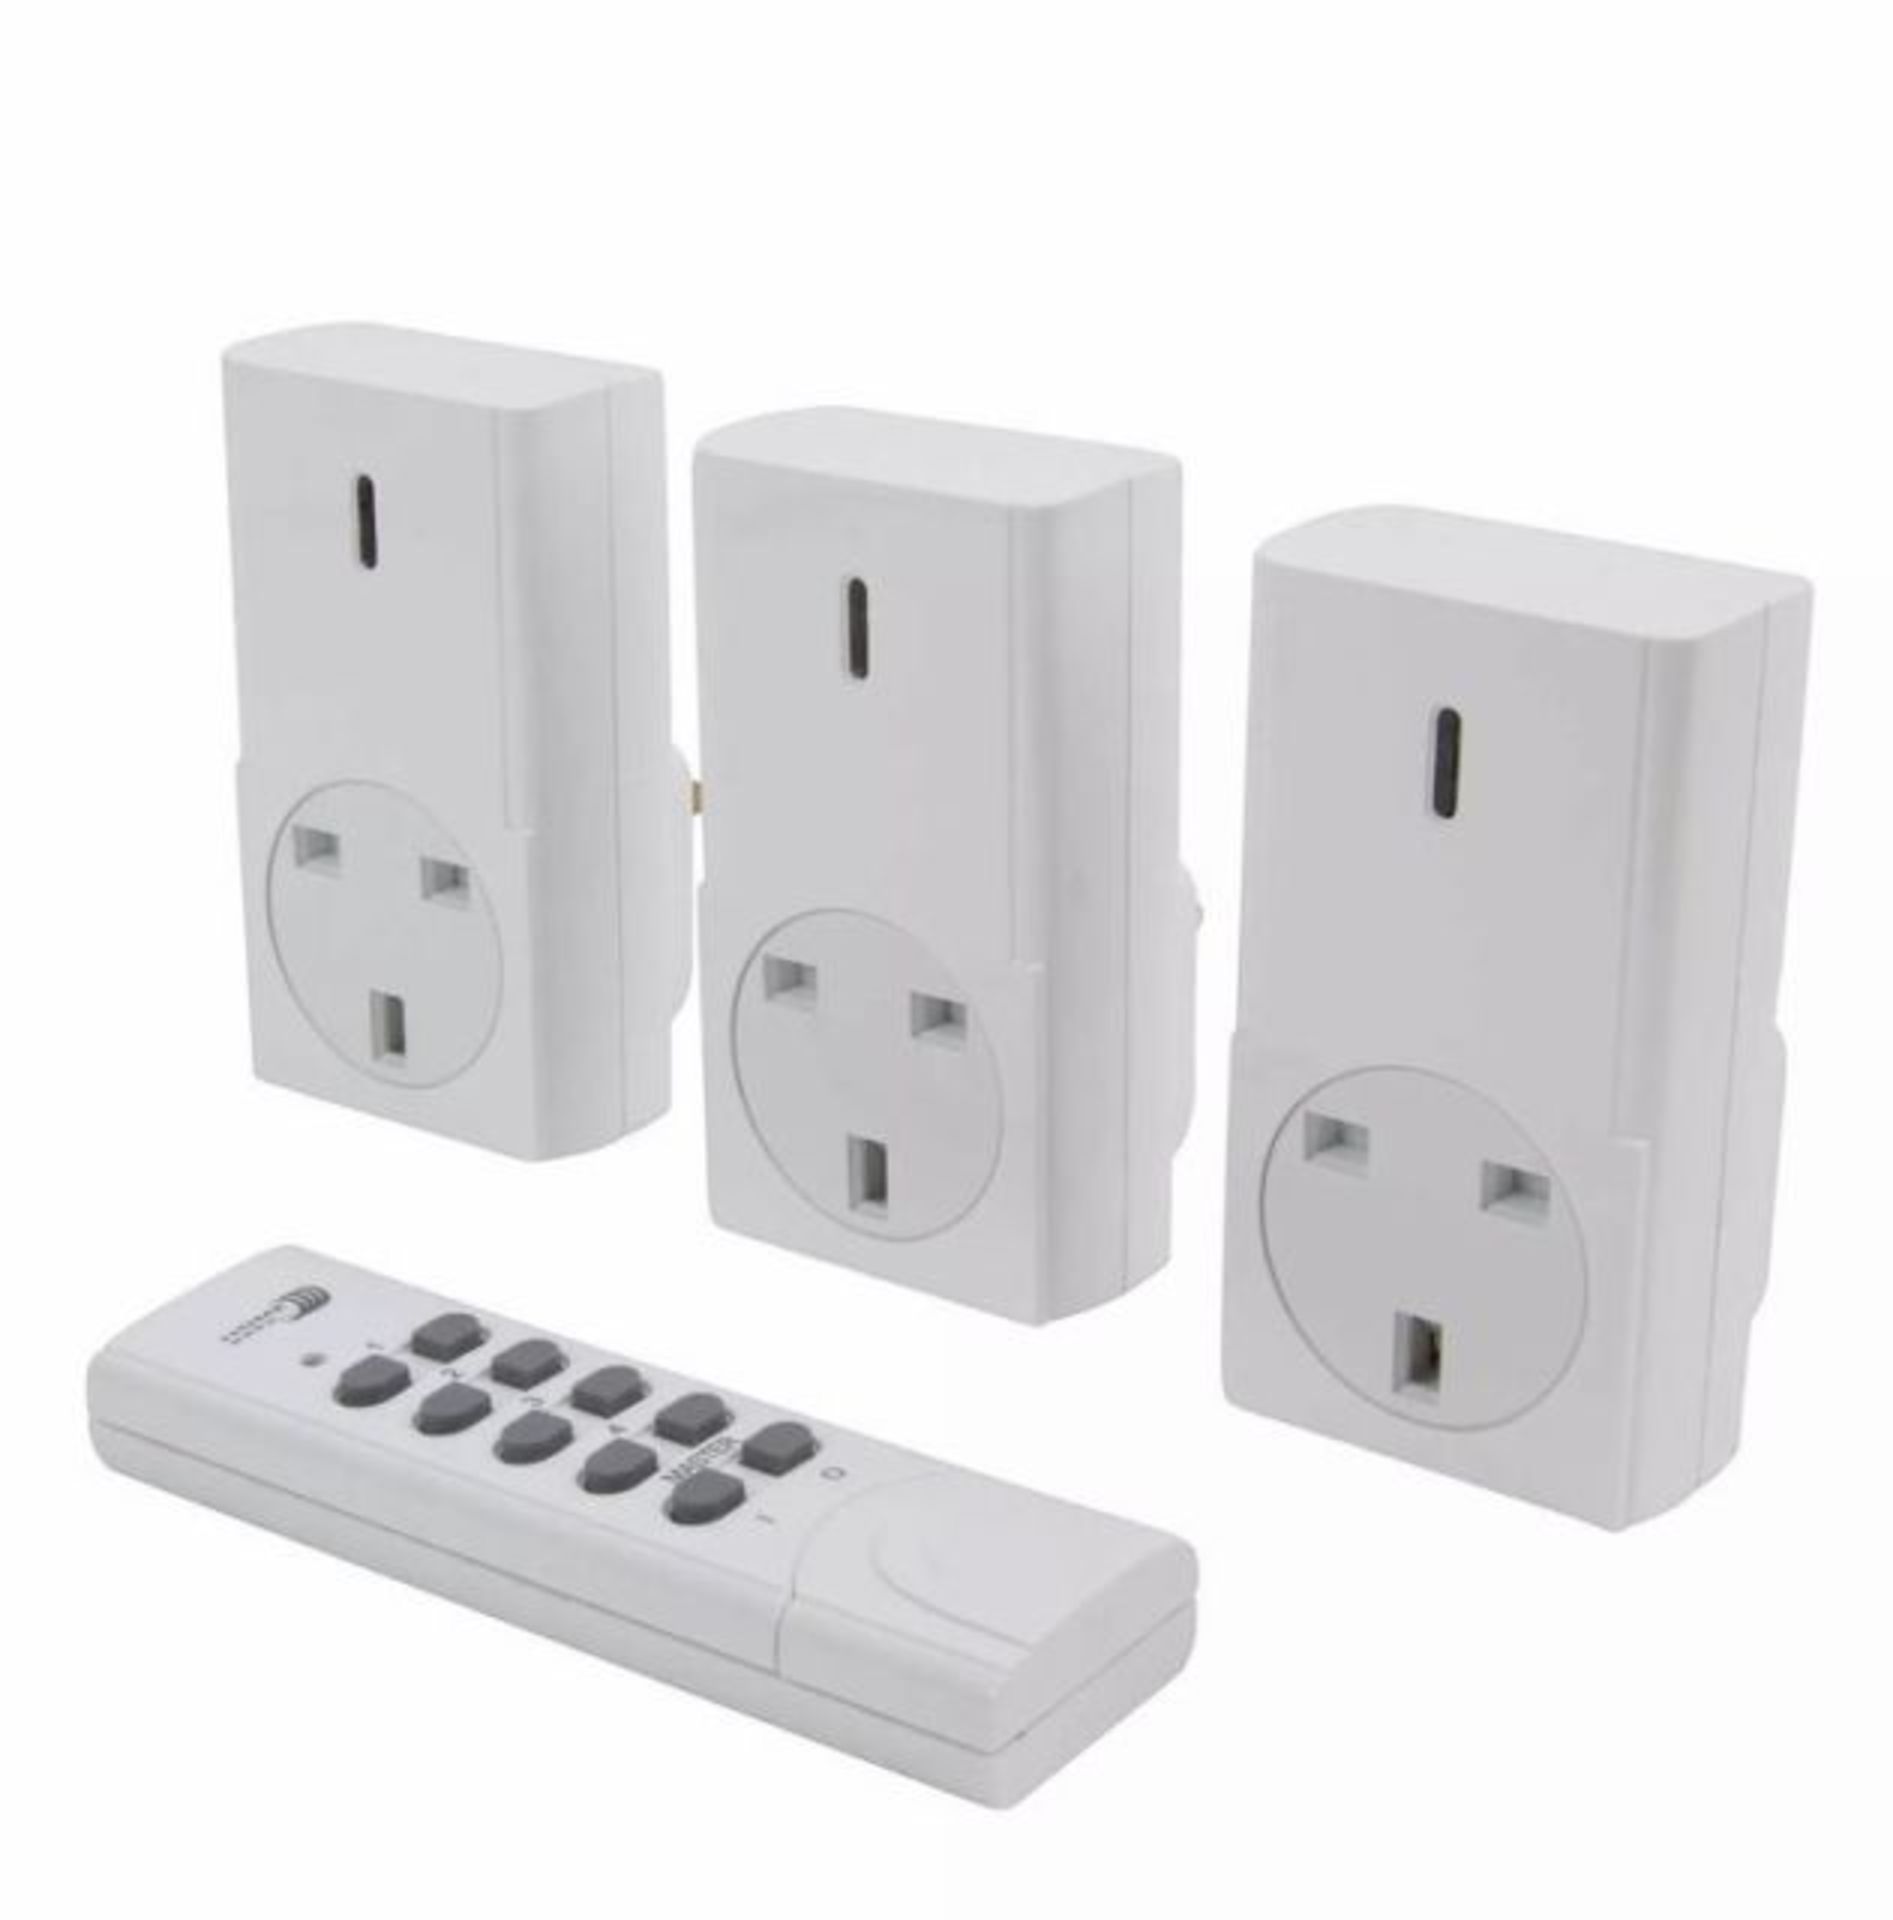 V *TRADE QTY* Brand New Indoor Remote Control Sockets with Four Receivers and Programmable remote - Image 3 of 3